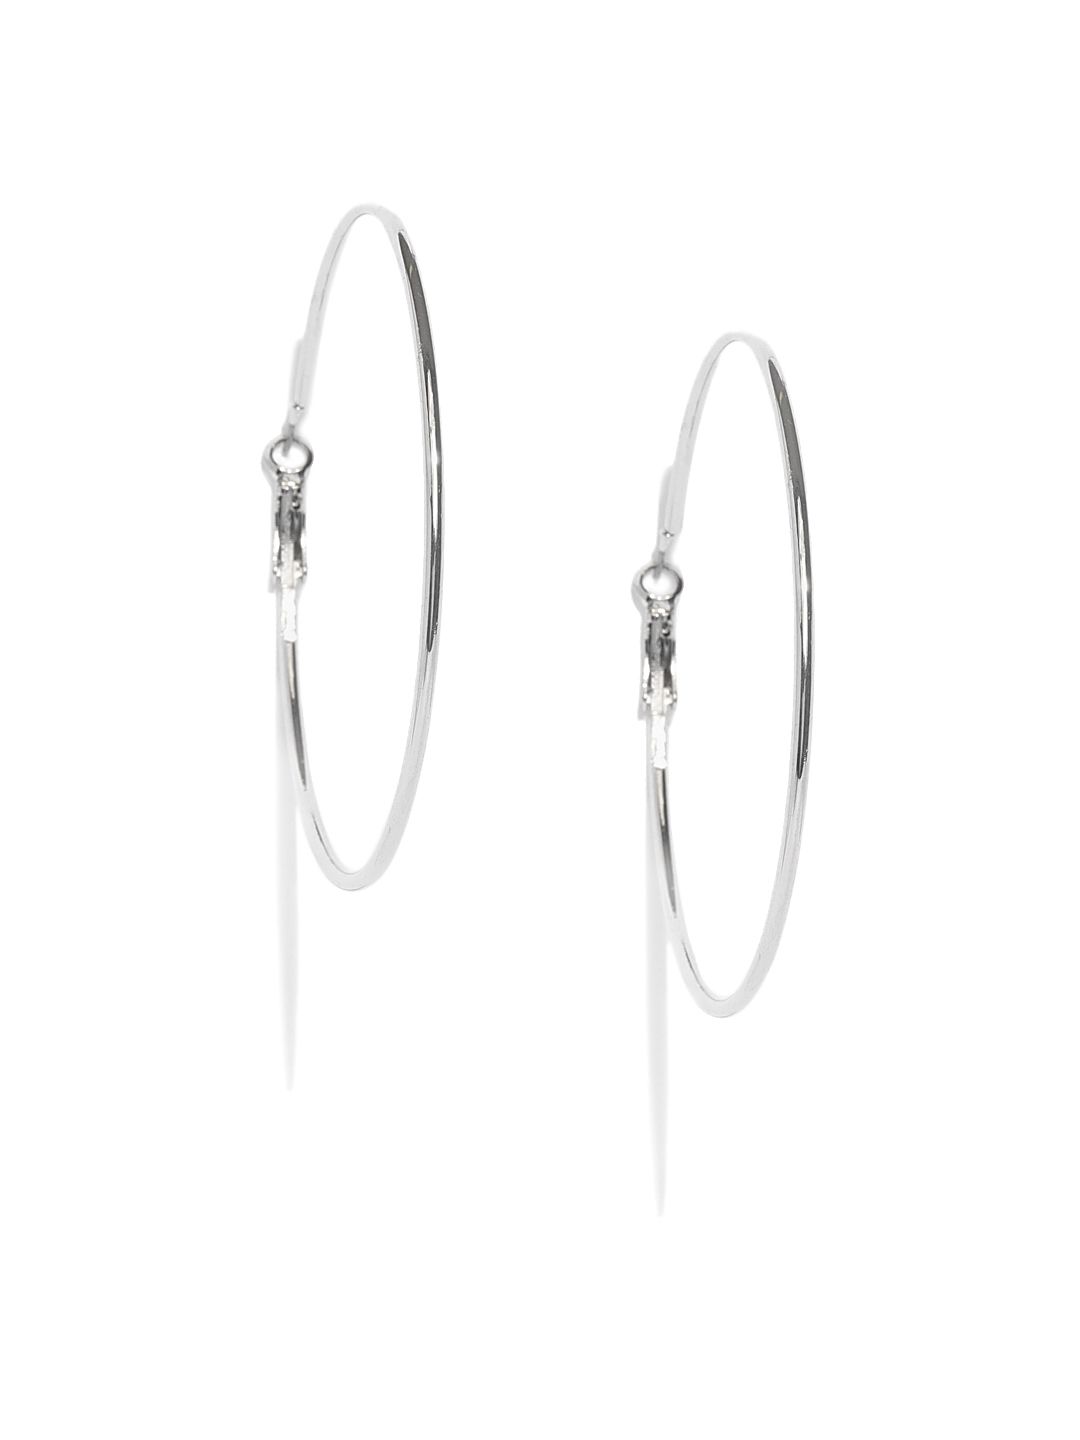 Accessorize Silver-Toned Circular Hoop Earrings Price in India